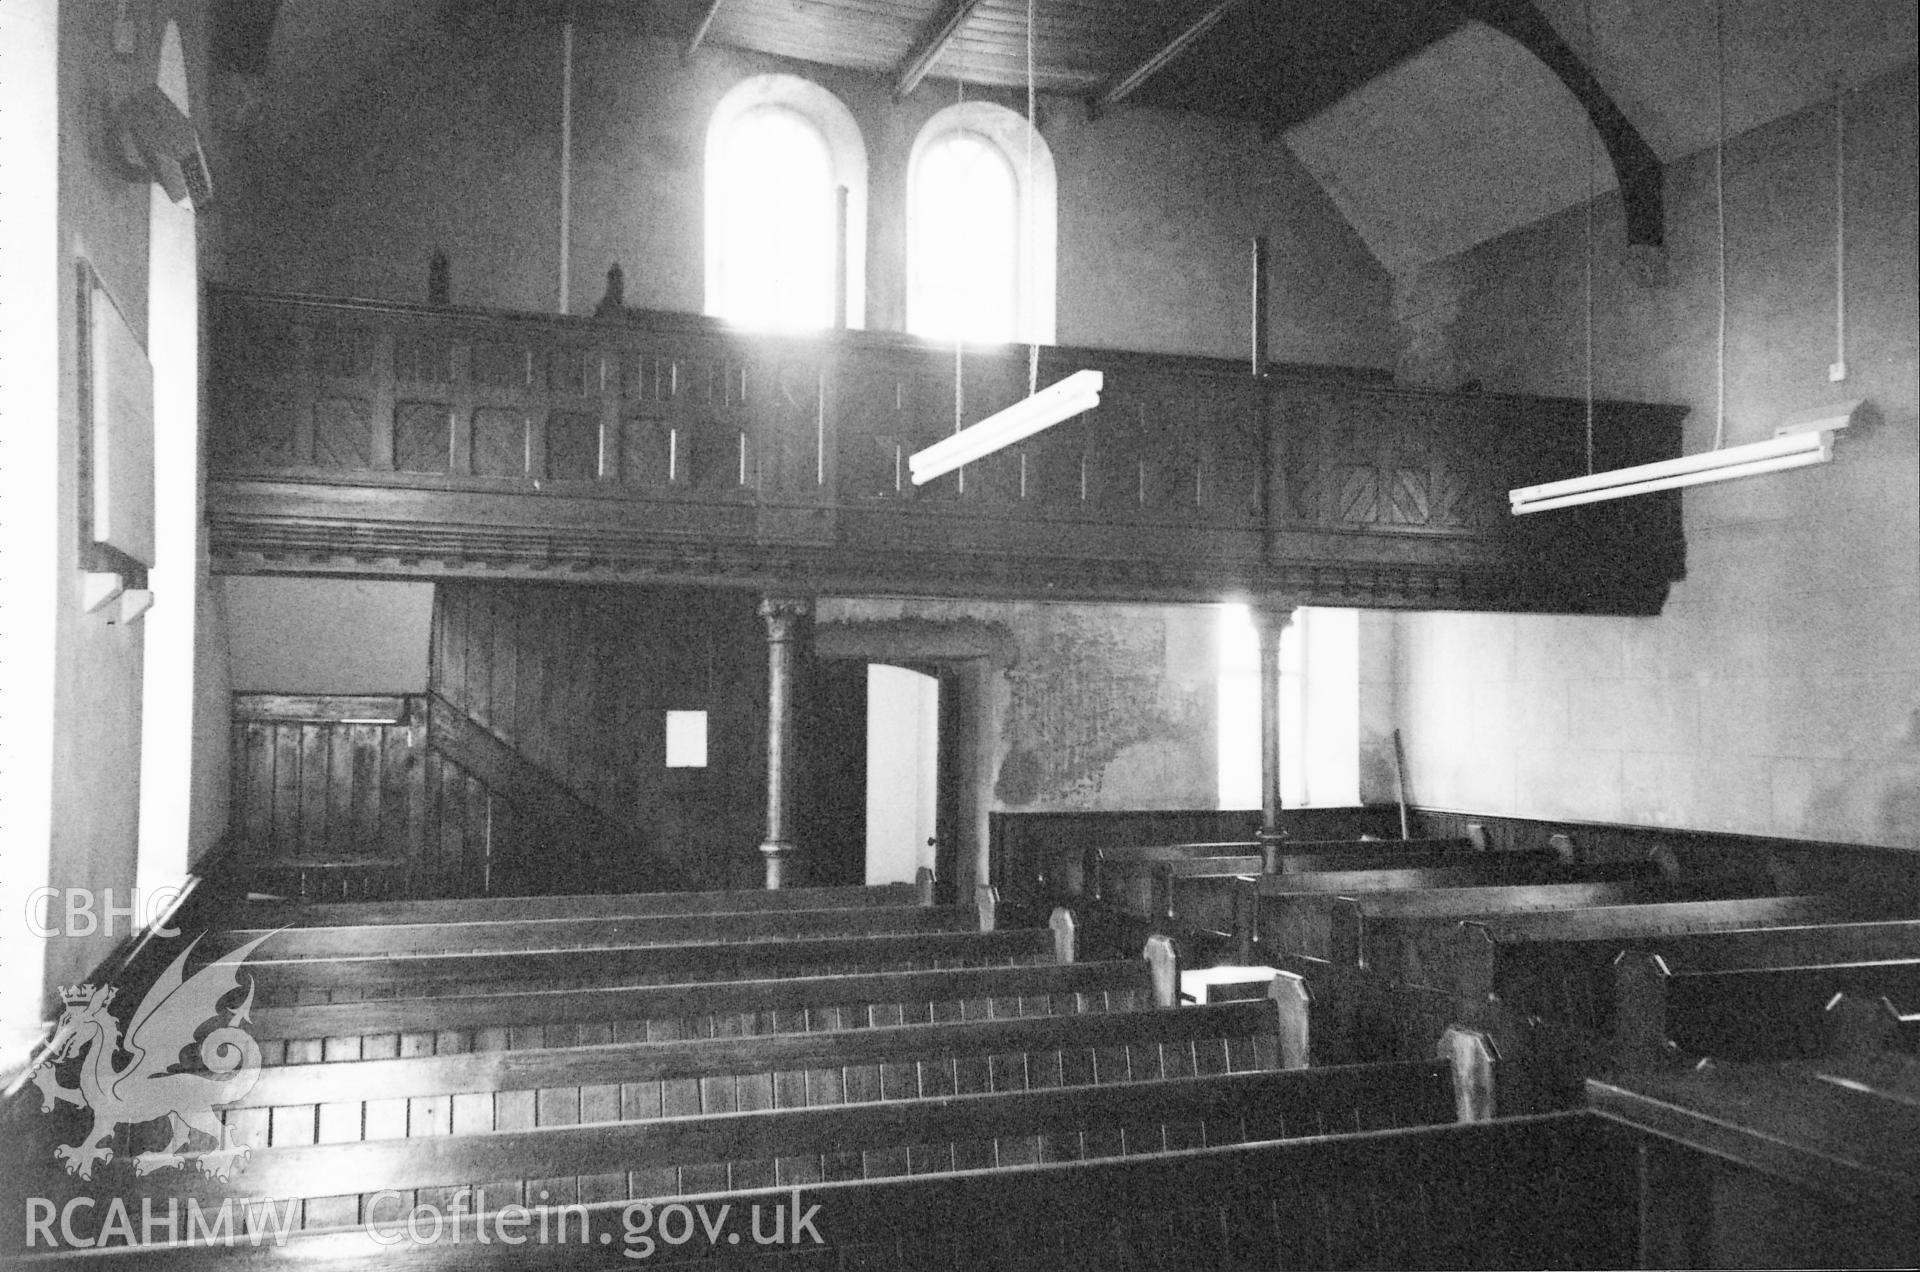 Digital copy of a black and white photograph showing an interior view of Tabernacle Independent Chapel, Rosemarket, taken by Robert Scourfield, 1995.